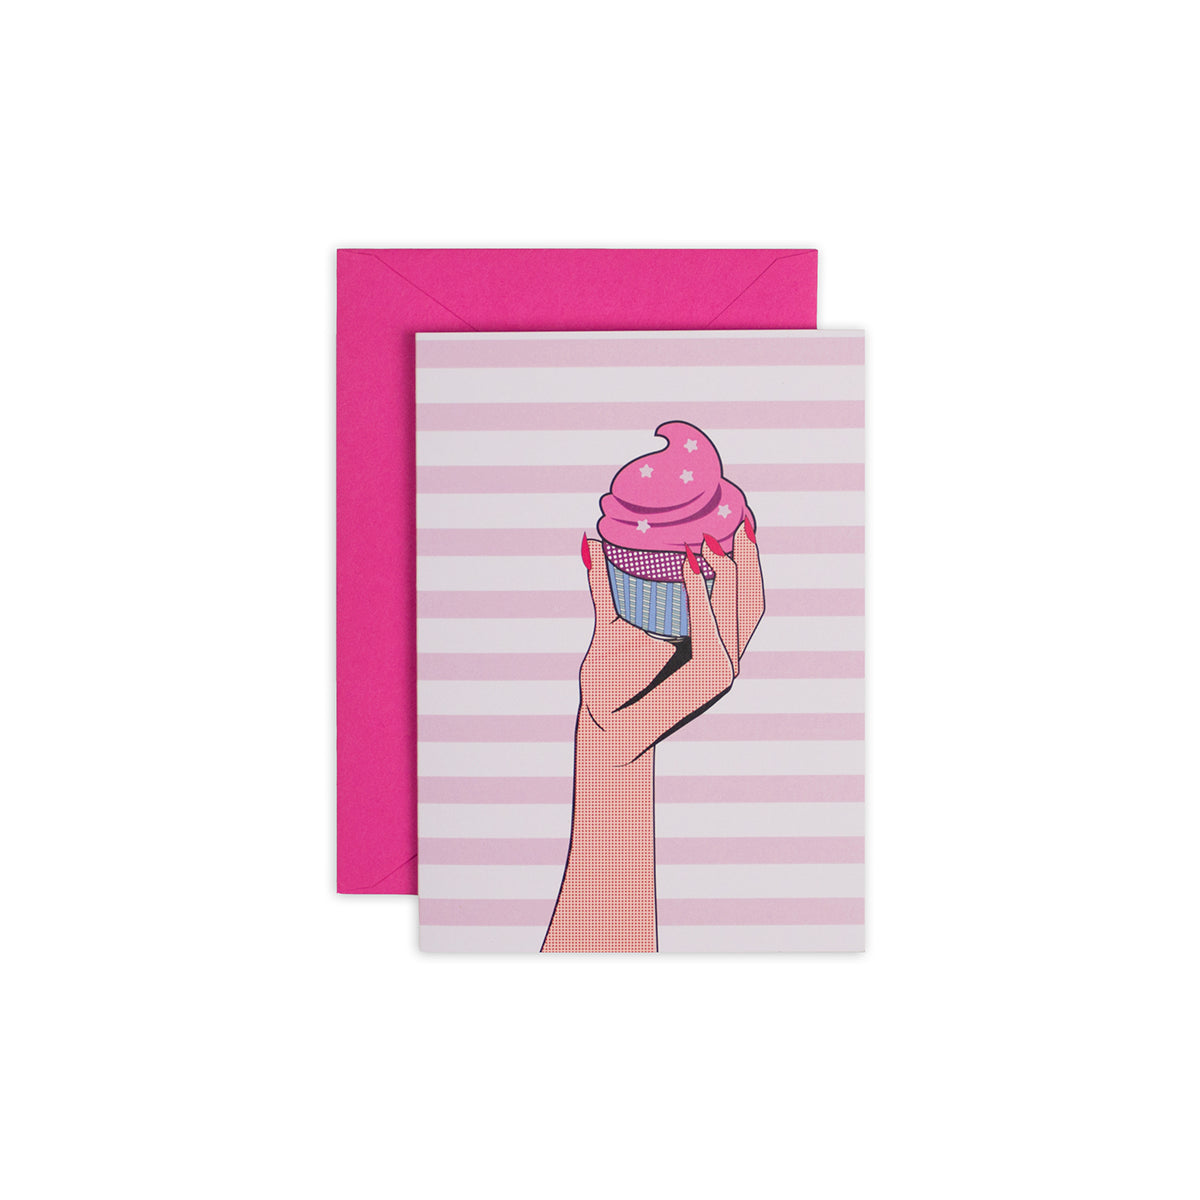 4 1/2" x 6 1/4" greeting card with pink and white stripes, featuring an illustration of a hand holding a cupcake in a pop art type style